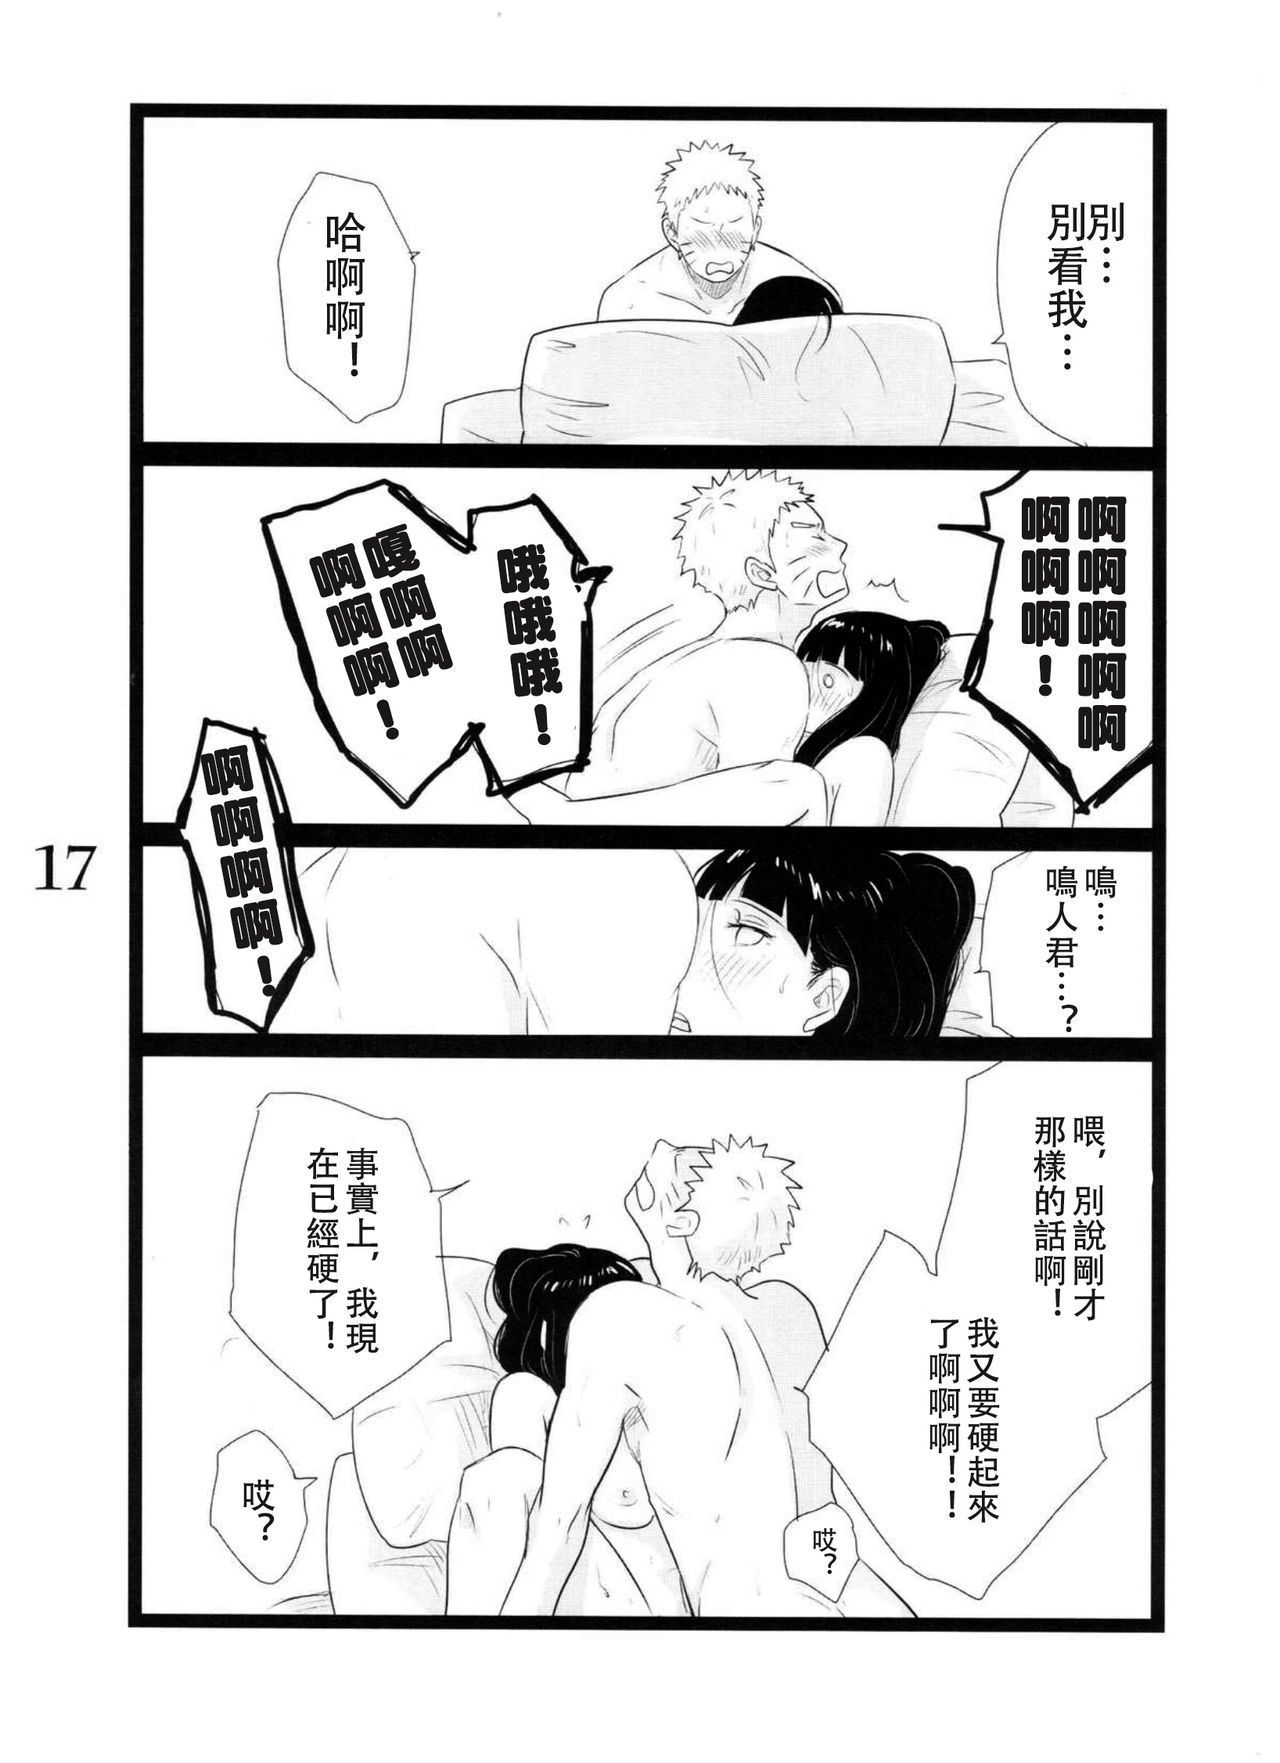 (C88) [blink (shimoyake)] YOUR MY SWEET - I LOVE YOU DARLING (Naruto) [Chinese] [沒有漢化] page 18 full